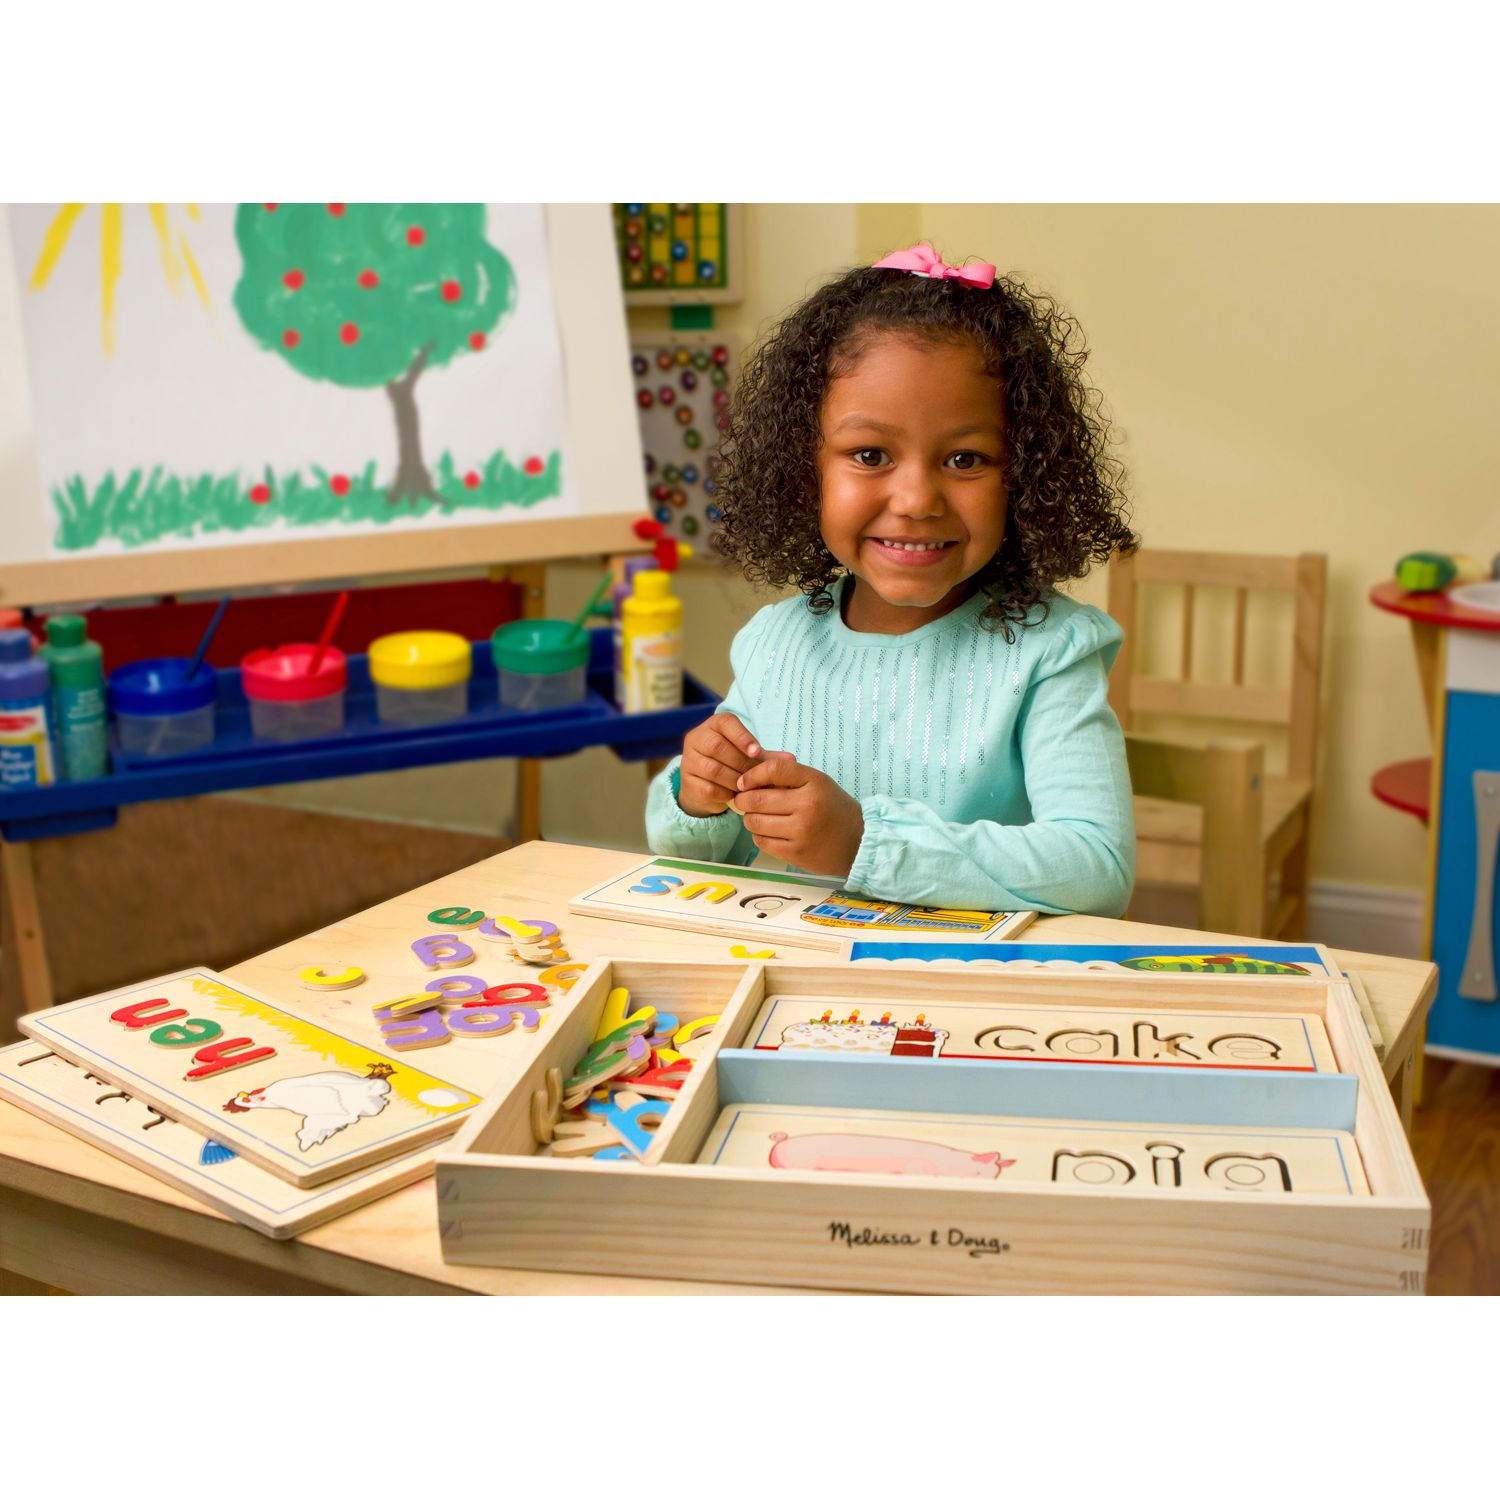 melissa and doug see and spell learning toy